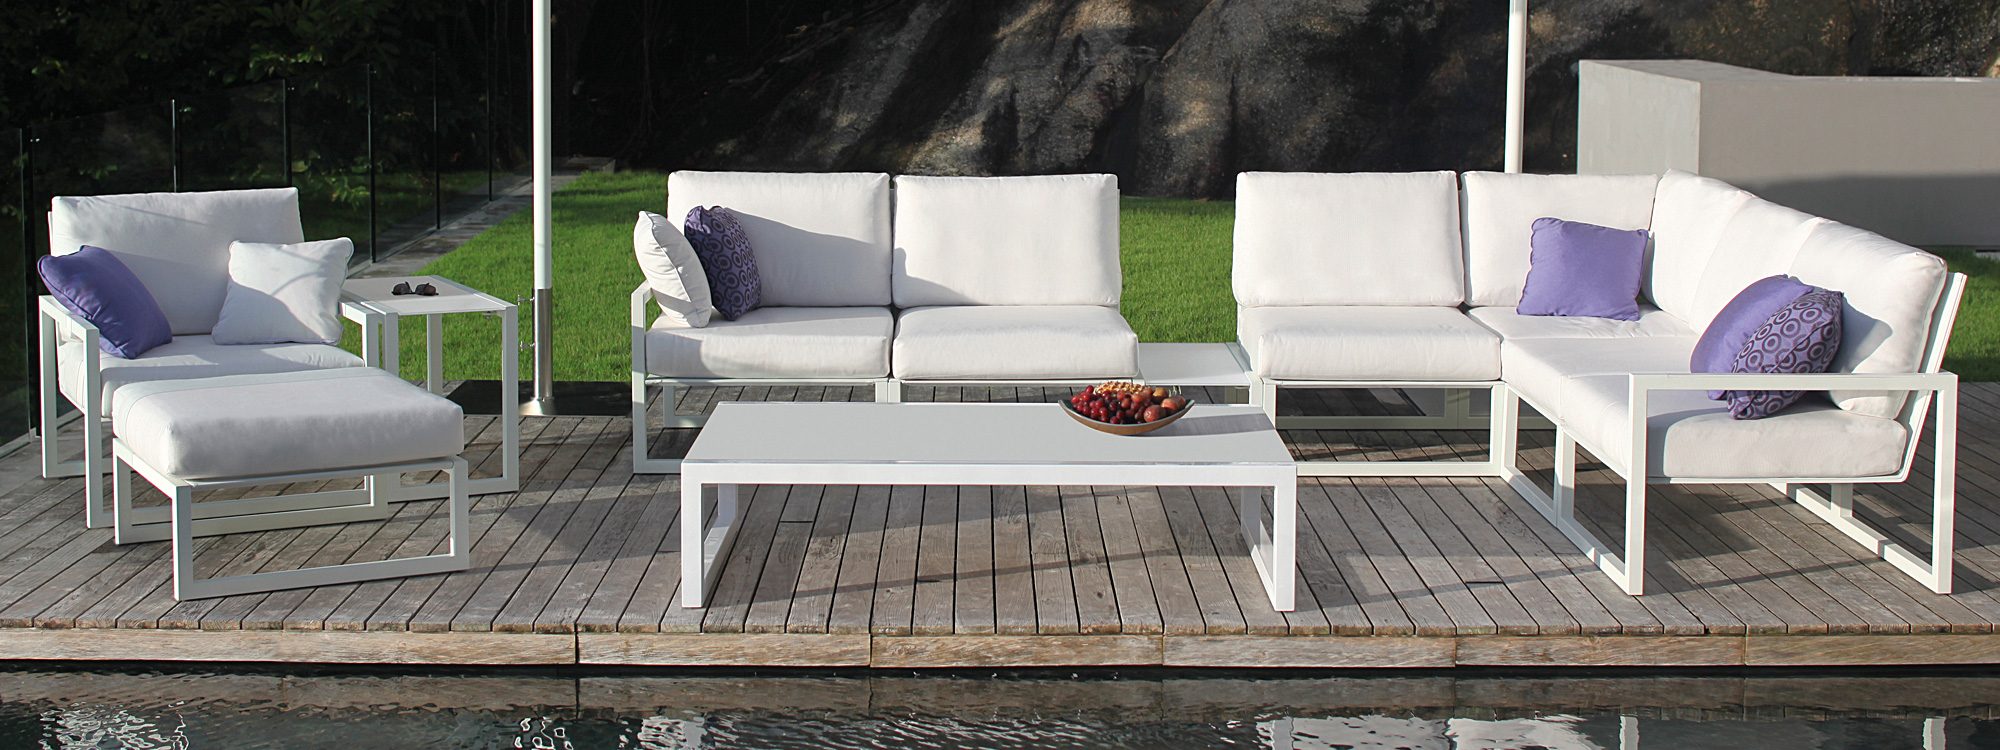 Image of white Ninix outdoor furniture on decking by Encompassco